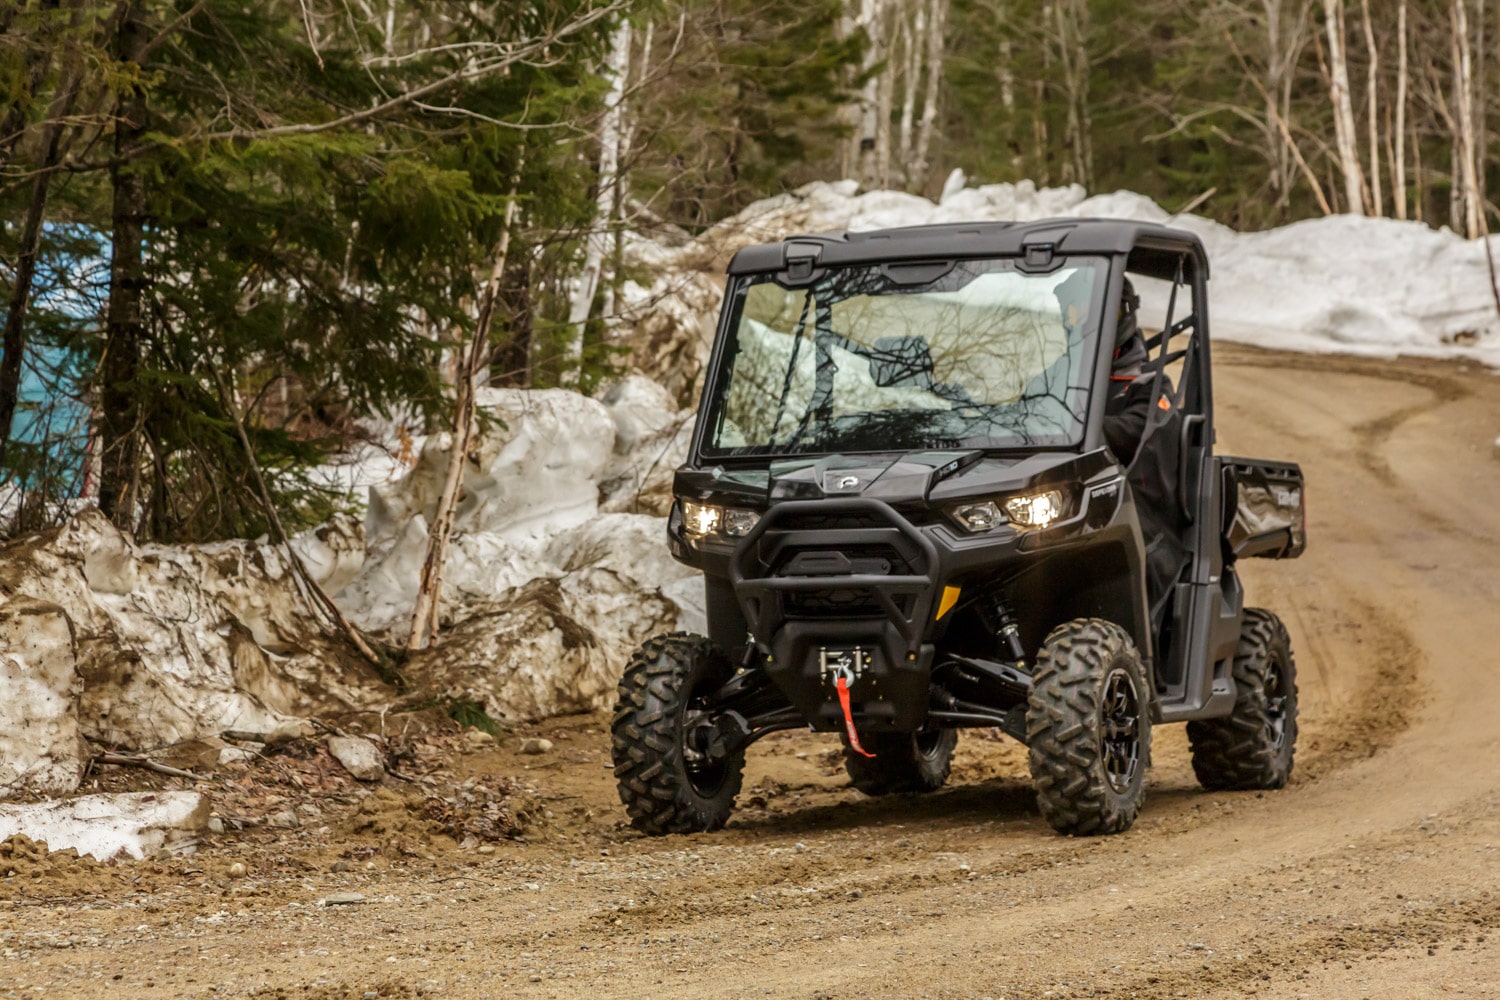 Can Am Defender XT HD10 2022 Test Ride 19 of 39 Can-Am Defender XT HD10 2022 – Test Ride